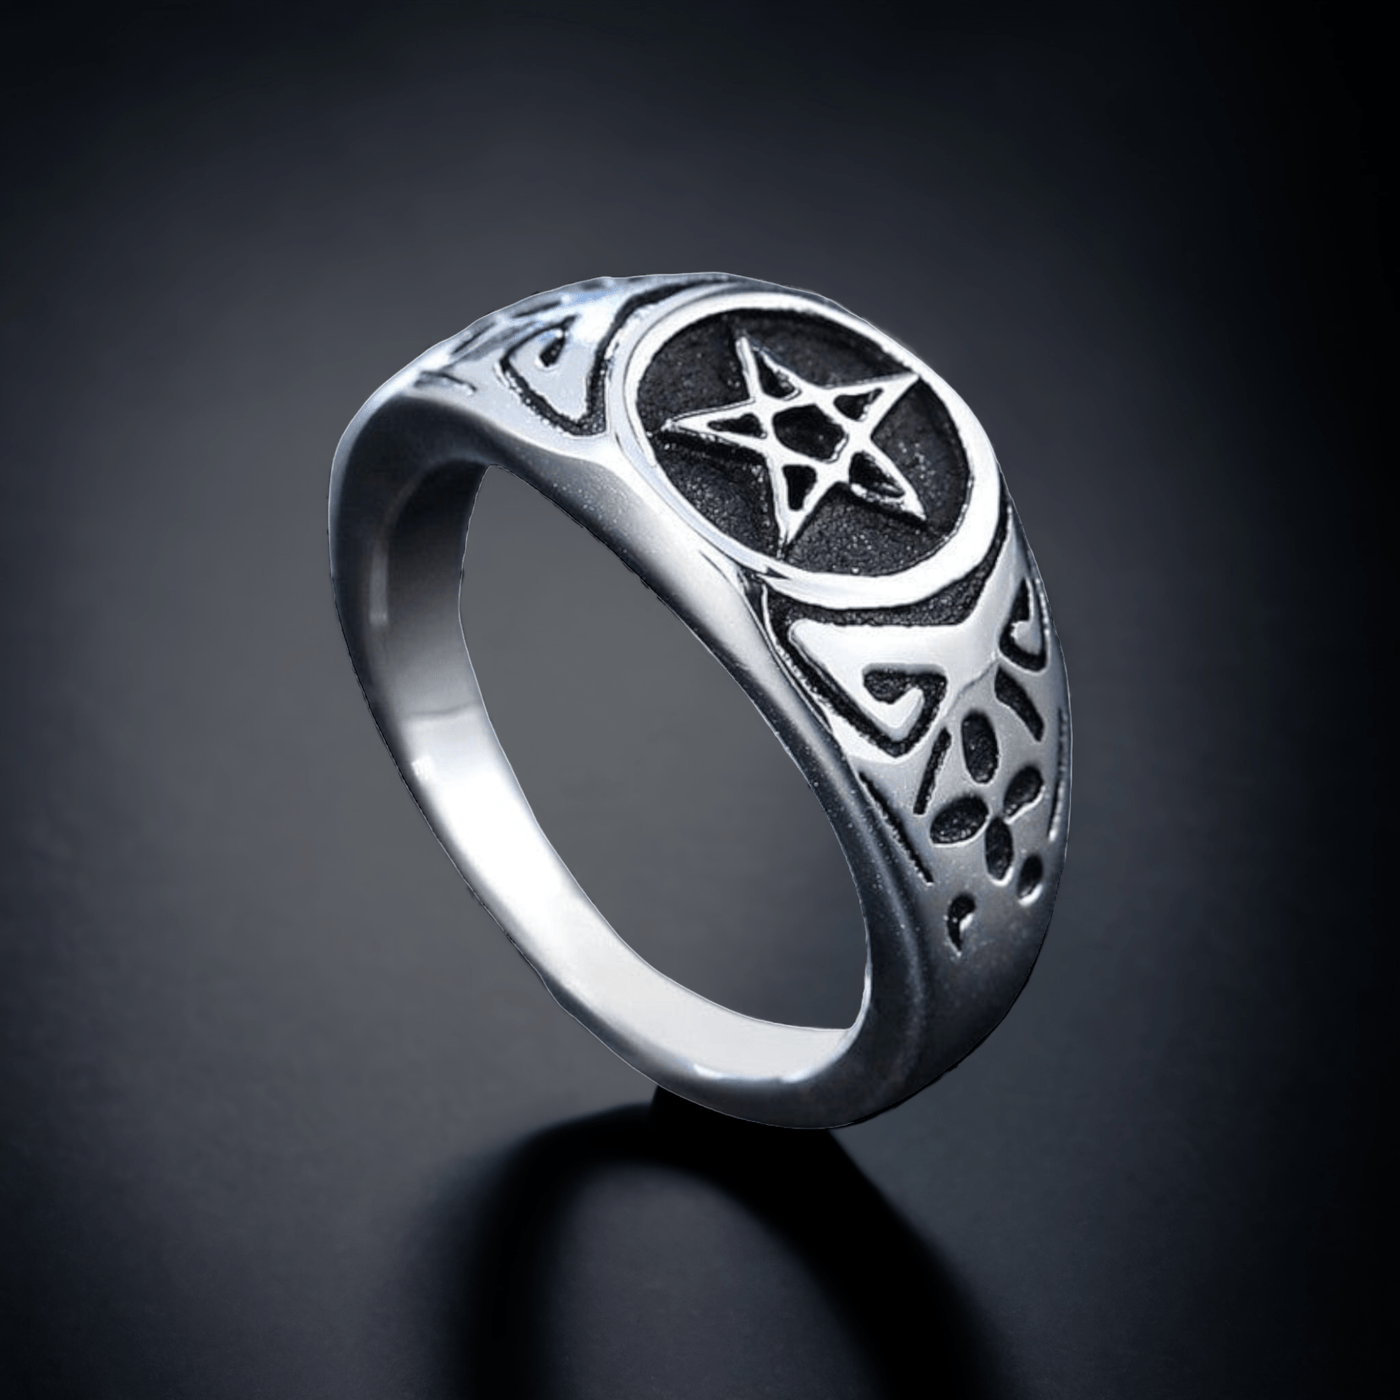 Wiccan Star